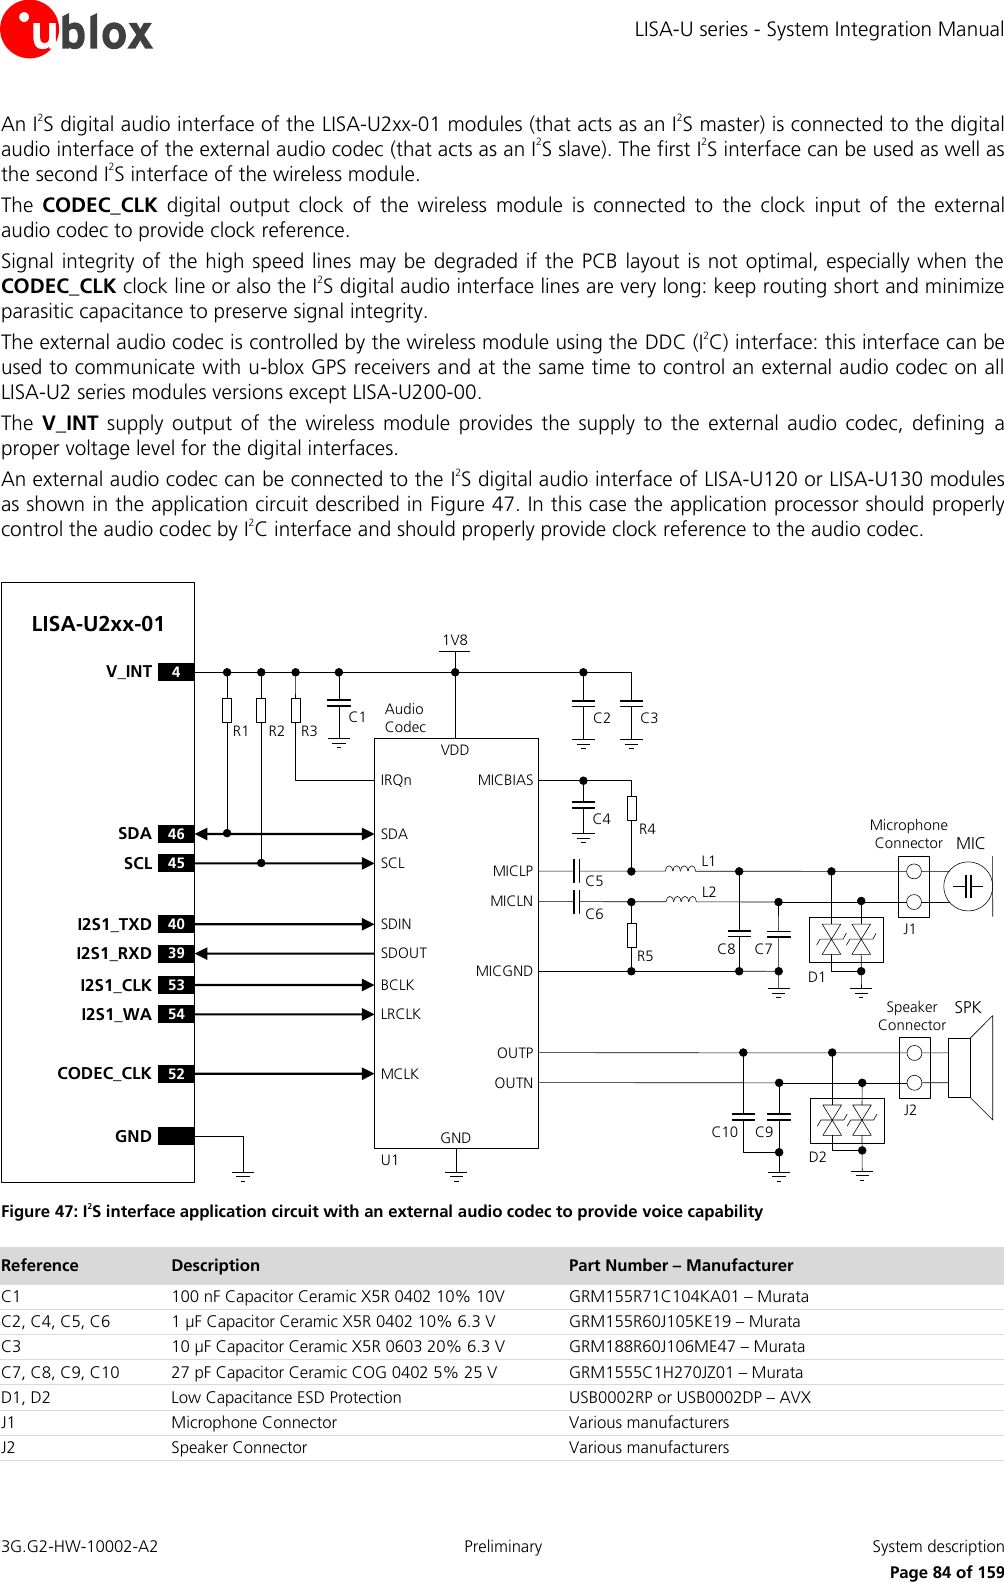 LISA-U series - System Integration Manual 3G.G2-HW-10002-A2  Preliminary  System description      Page 84 of 159 An I2S digital audio interface of the LISA-U2xx-01 modules (that acts as an I2S master) is connected to the digital audio interface of the external audio codec (that acts as an I2S slave). The first I2S interface can be used as well as the second I2S interface of the wireless module. The  CODEC_CLK  digital  output  clock  of  the  wireless  module  is  connected  to  the  clock  input  of  the  external audio codec to provide clock reference. Signal integrity of the high speed lines may be degraded if the PCB layout is not  optimal, especially when the CODEC_CLK clock line or also the I2S digital audio interface lines are very long: keep routing short and minimize parasitic capacitance to preserve signal integrity. The external audio codec is controlled by the wireless module using the DDC (I2C) interface: this interface can be used to communicate with u-blox GPS receivers and at the same time to control an external audio codec on all LISA-U2 series modules versions except LISA-U200-00. The  V_INT supply  output  of  the wireless module  provides  the  supply to  the  external  audio codec,  defining  a proper voltage level for the digital interfaces. An external audio codec can be connected to the I2S digital audio interface of LISA-U120 or LISA-U130 modules as shown in the application circuit described in Figure 47. In this case the application processor should properly control the audio codec by I2C interface and should properly provide clock reference to the audio codec.  53I2S1_CLK54I2S1_WAR2R1BCLKGNDU1LRCLKC3C2LISA-U2xx-01Audio   Codec40I2S1_TXD39I2S1_RXDSDINSDOUT46SDA45SCLSDASCL52CODEC_CLK MCLKGNDIRQnR3 C1C10D2C9SPKSpeaker ConnectorOUTPOUTNJ24V_INTVDDMICBIASC4 R4C5C6L1MICLNMICLPD1Microphone ConnectorL2MICC8 C7J1MICGND R51V8 Figure 47: I2S interface application circuit with an external audio codec to provide voice capability Reference Description Part Number – Manufacturer C1 100 nF Capacitor Ceramic X5R 0402 10% 10V GRM155R71C104KA01 – Murata C2, C4, C5, C6 1 µF Capacitor Ceramic X5R 0402 10% 6.3 V GRM155R60J105KE19 – Murata C3 10 µF Capacitor Ceramic X5R 0603 20% 6.3 V GRM188R60J106ME47 – Murata C7, C8, C9, C10 27 pF Capacitor Ceramic COG 0402 5% 25 V  GRM1555C1H270JZ01 – Murata D1, D2 Low Capacitance ESD Protection USB0002RP or USB0002DP – AVX J1 Microphone Connector Various manufacturers  J2 Speaker Connector Various manufacturers  